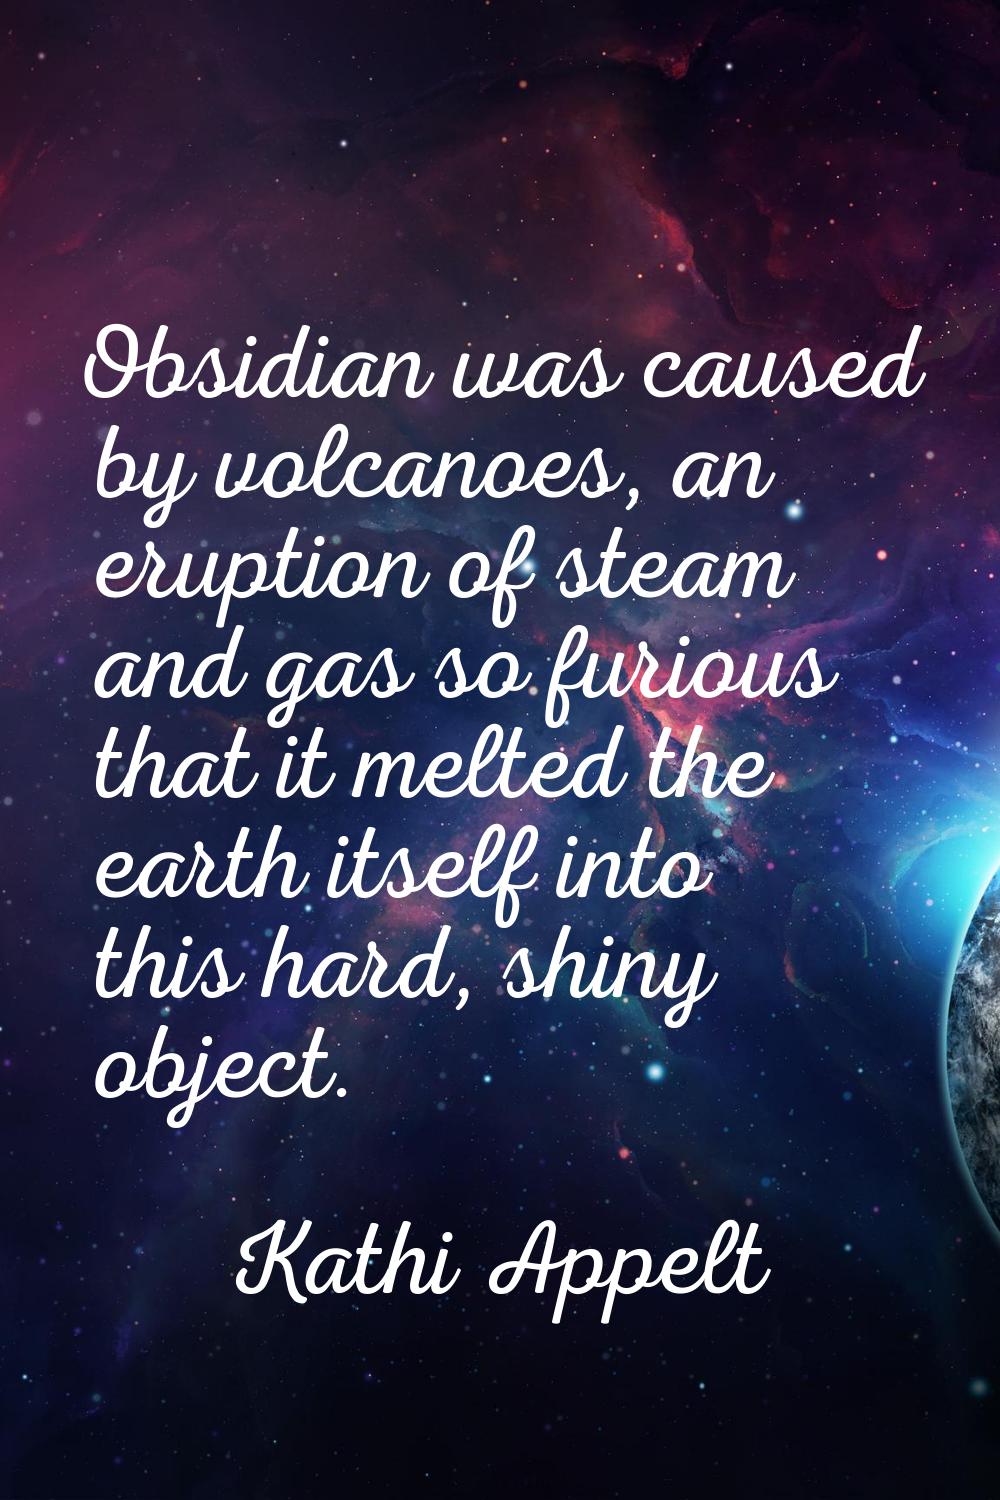 Obsidian was caused by volcanoes, an eruption of steam and gas so furious that it melted the earth 